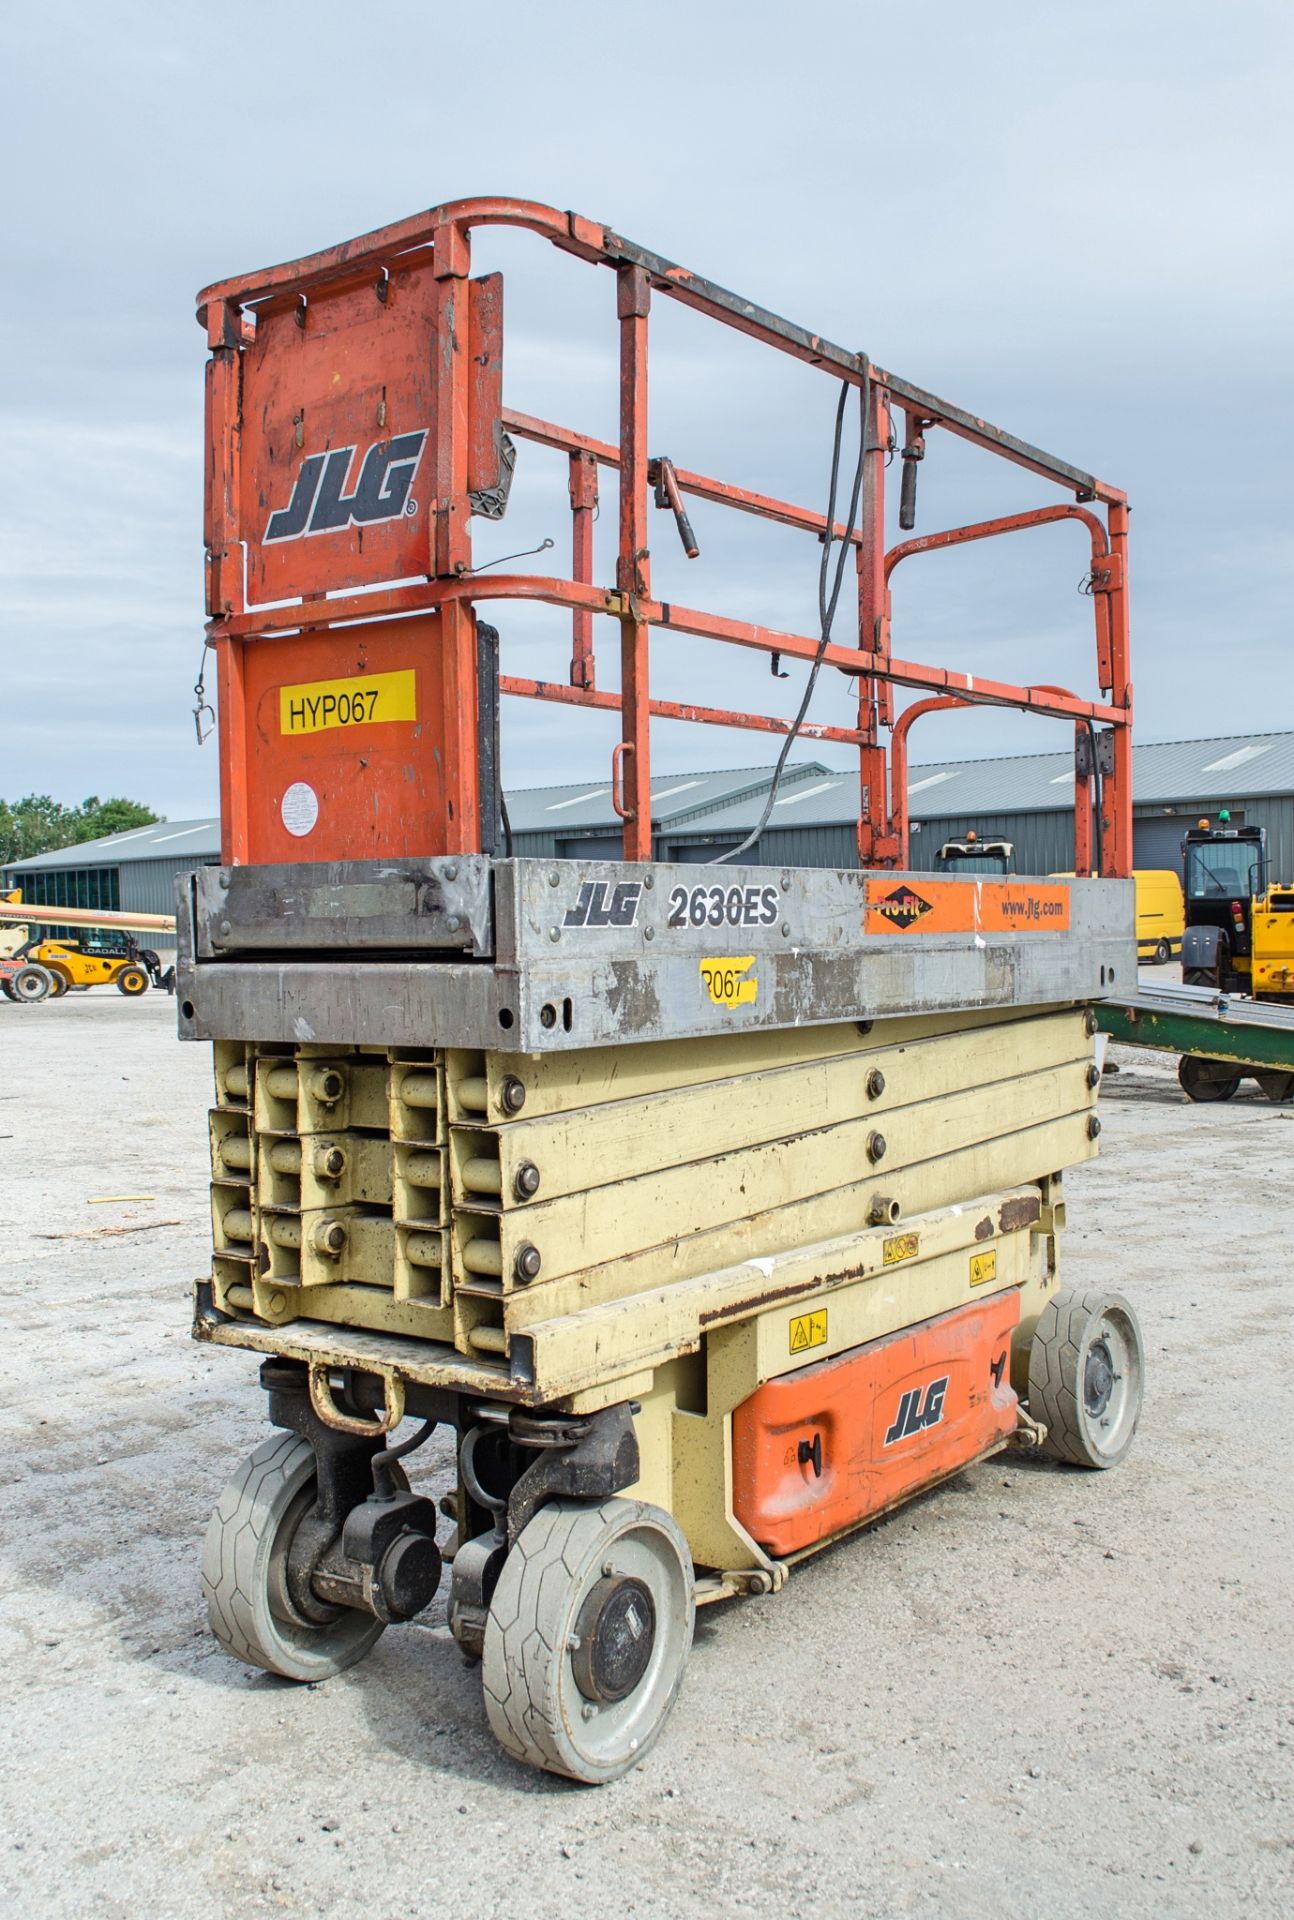 JLG 2630 ES battery electric scissor lift Year: 2006 S/N: 1200011002 Recorded hours: 355 HYP067 - Image 3 of 12